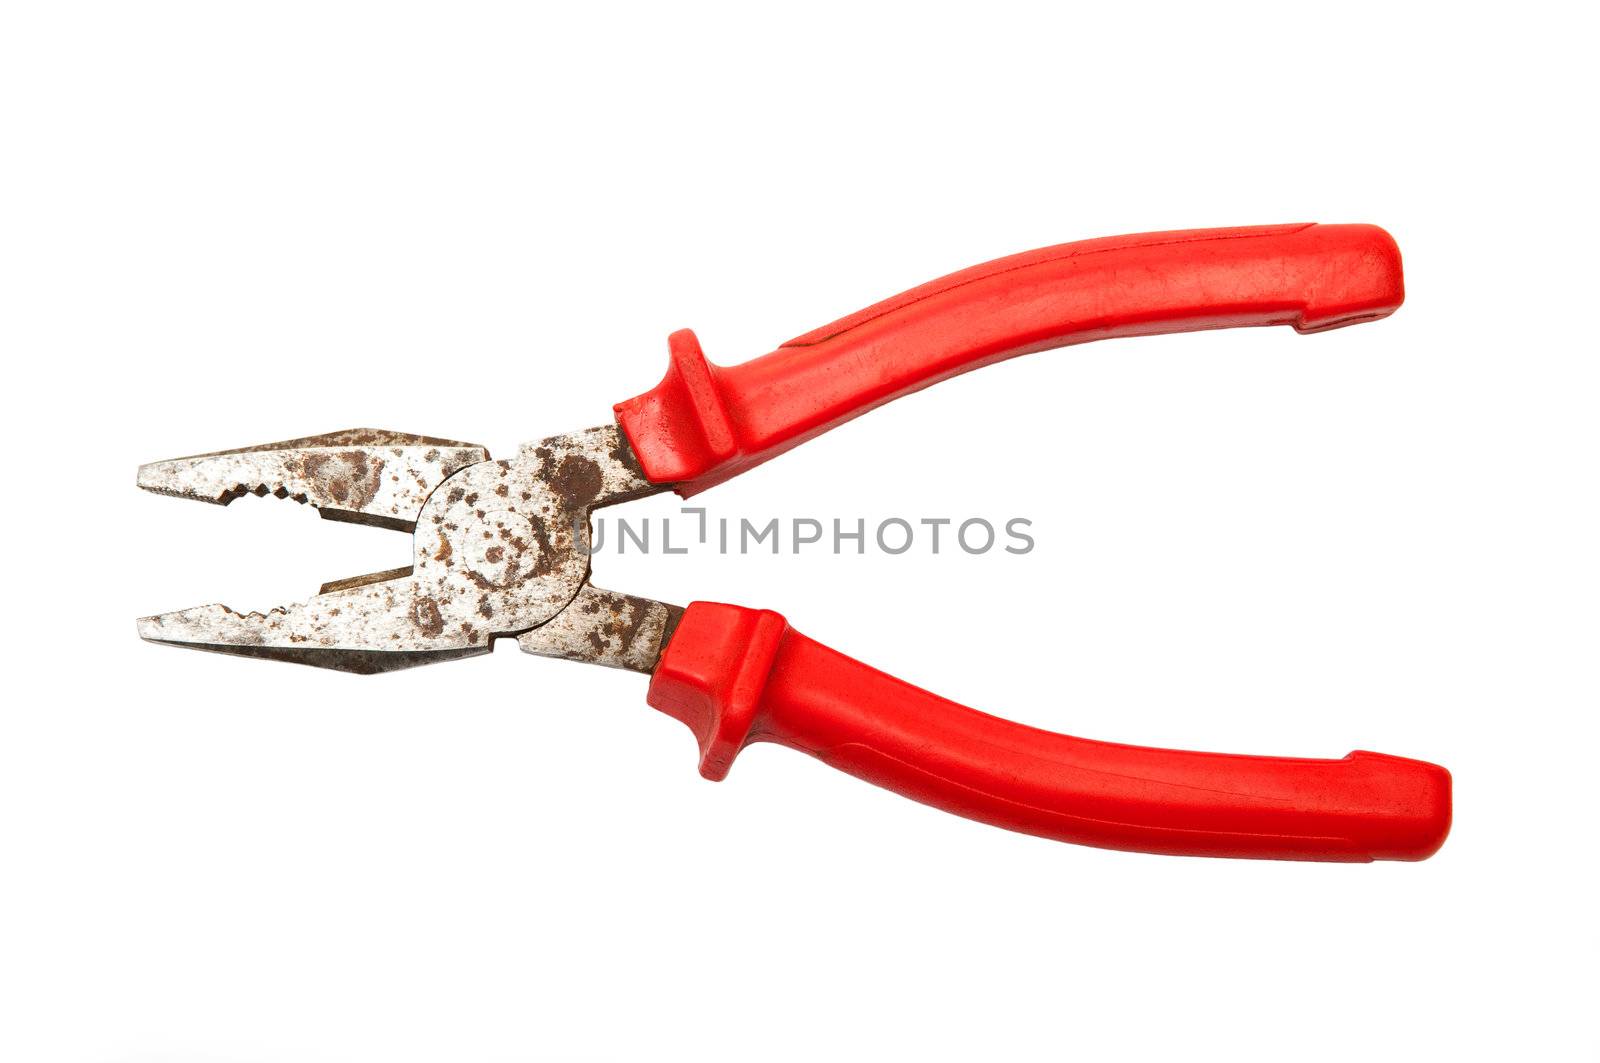 Pliers isolated on white